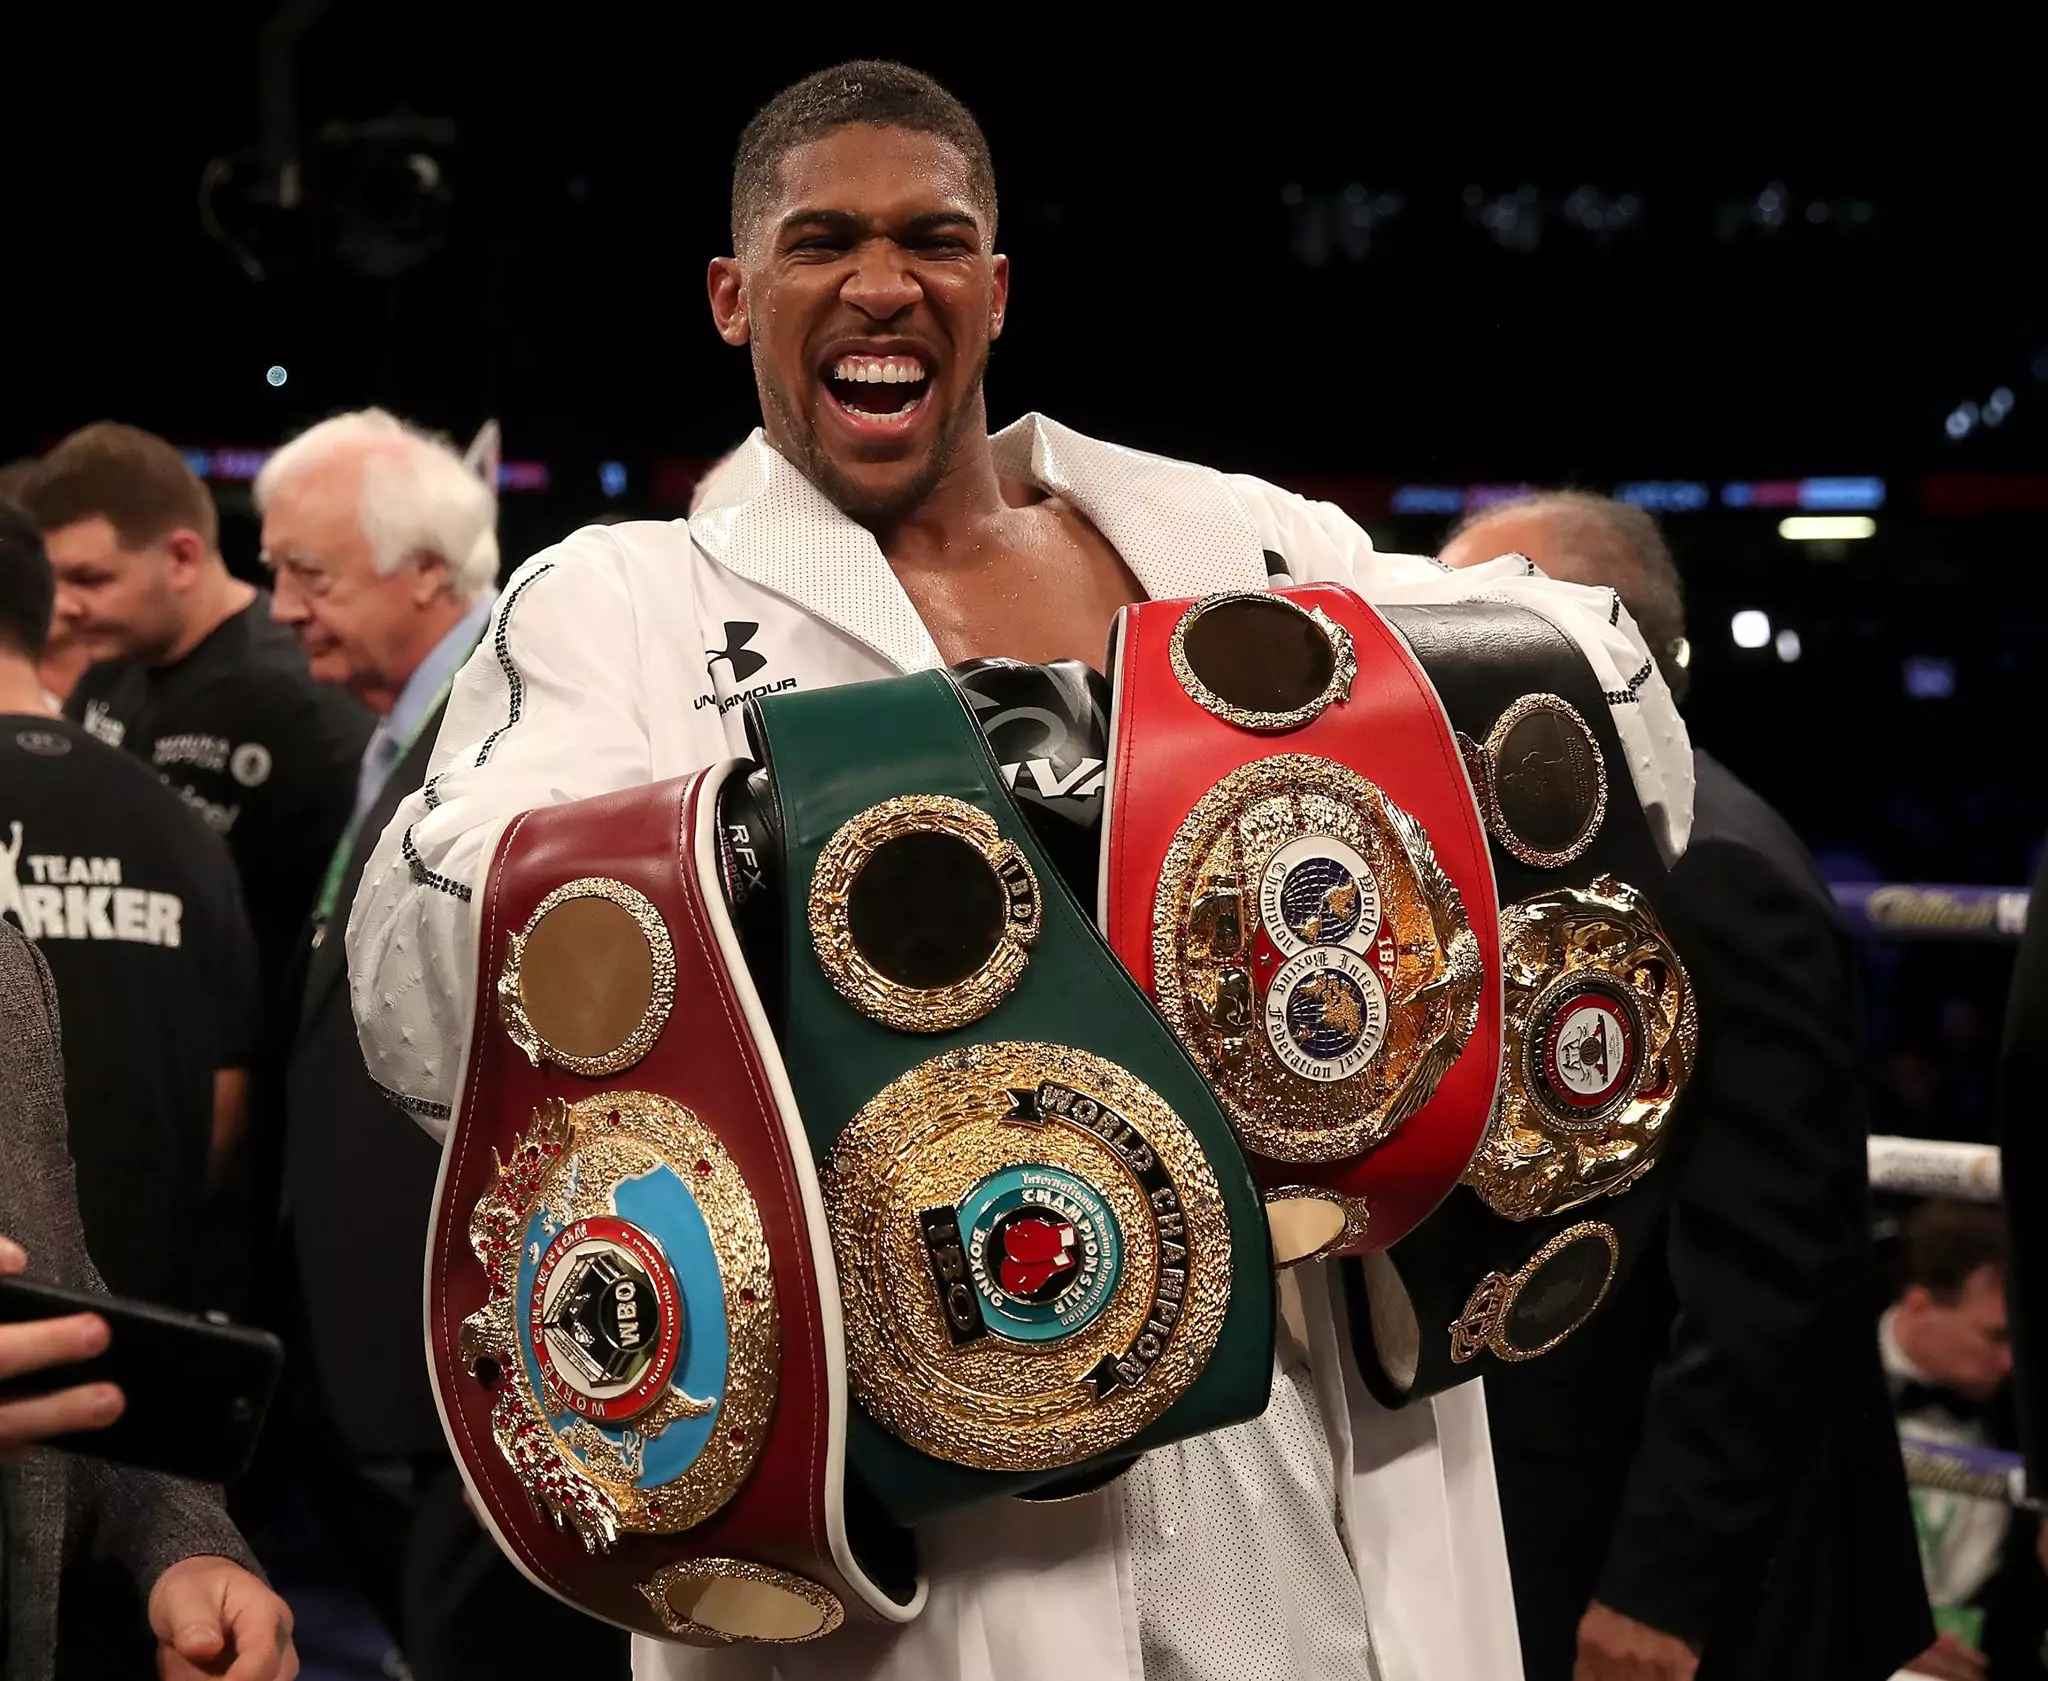 Joshua with his world titles including WBA title. Image: PA